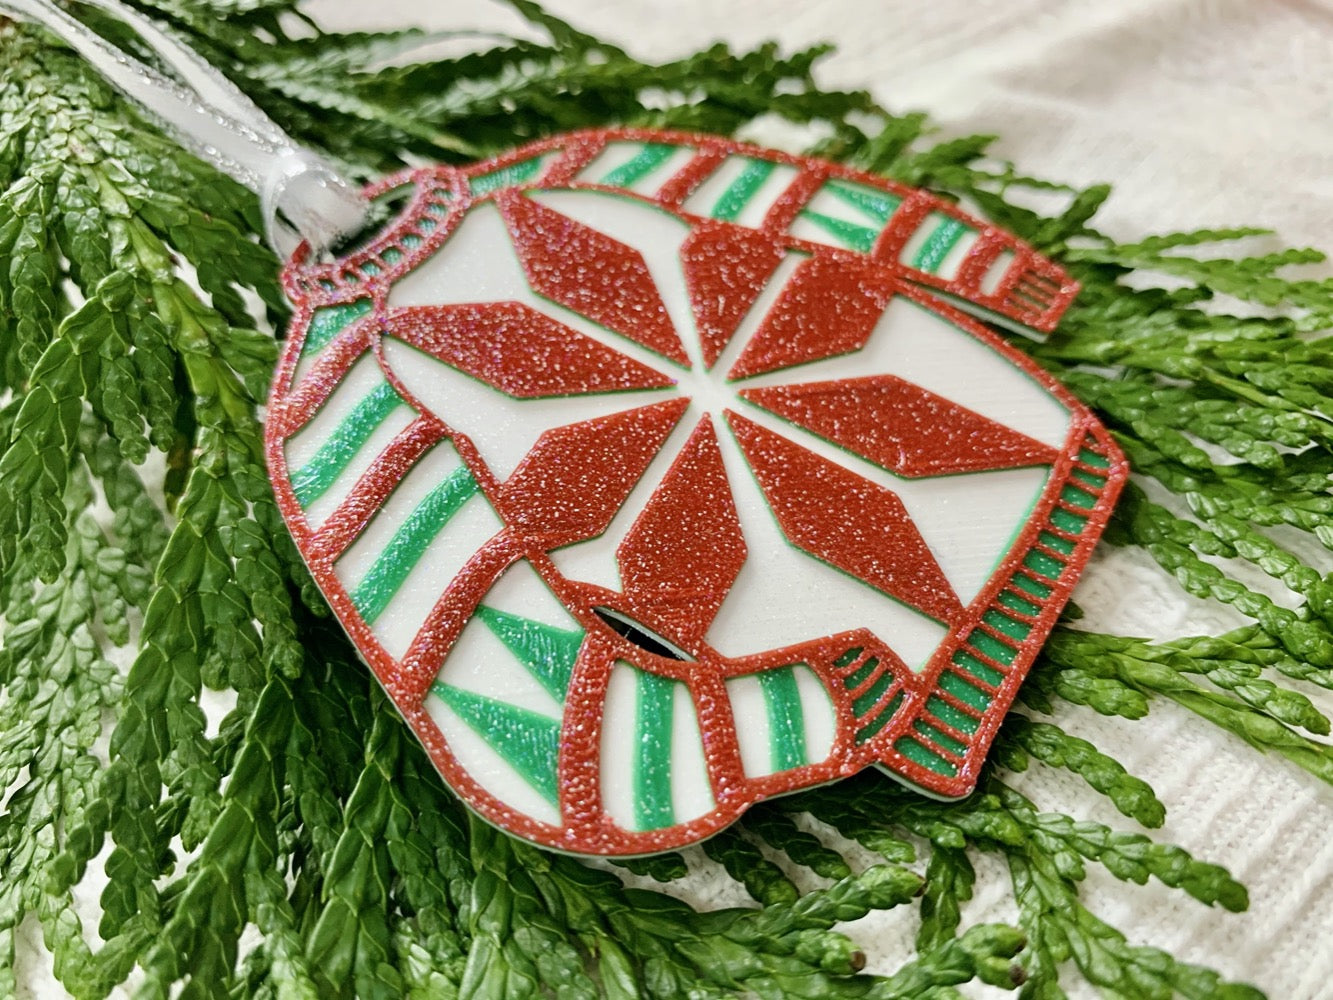 Shown on a white fabric background and with sprigs of evergreen is a R+D 3D printed ornament. It is in the shape of a chunky holiday sweater. It is white with red and green stripes, trees on the sleeves, and a snowflake in the center. The entire ugly sweater ornament is covered in glitter so it will shimmer and shine in the light.